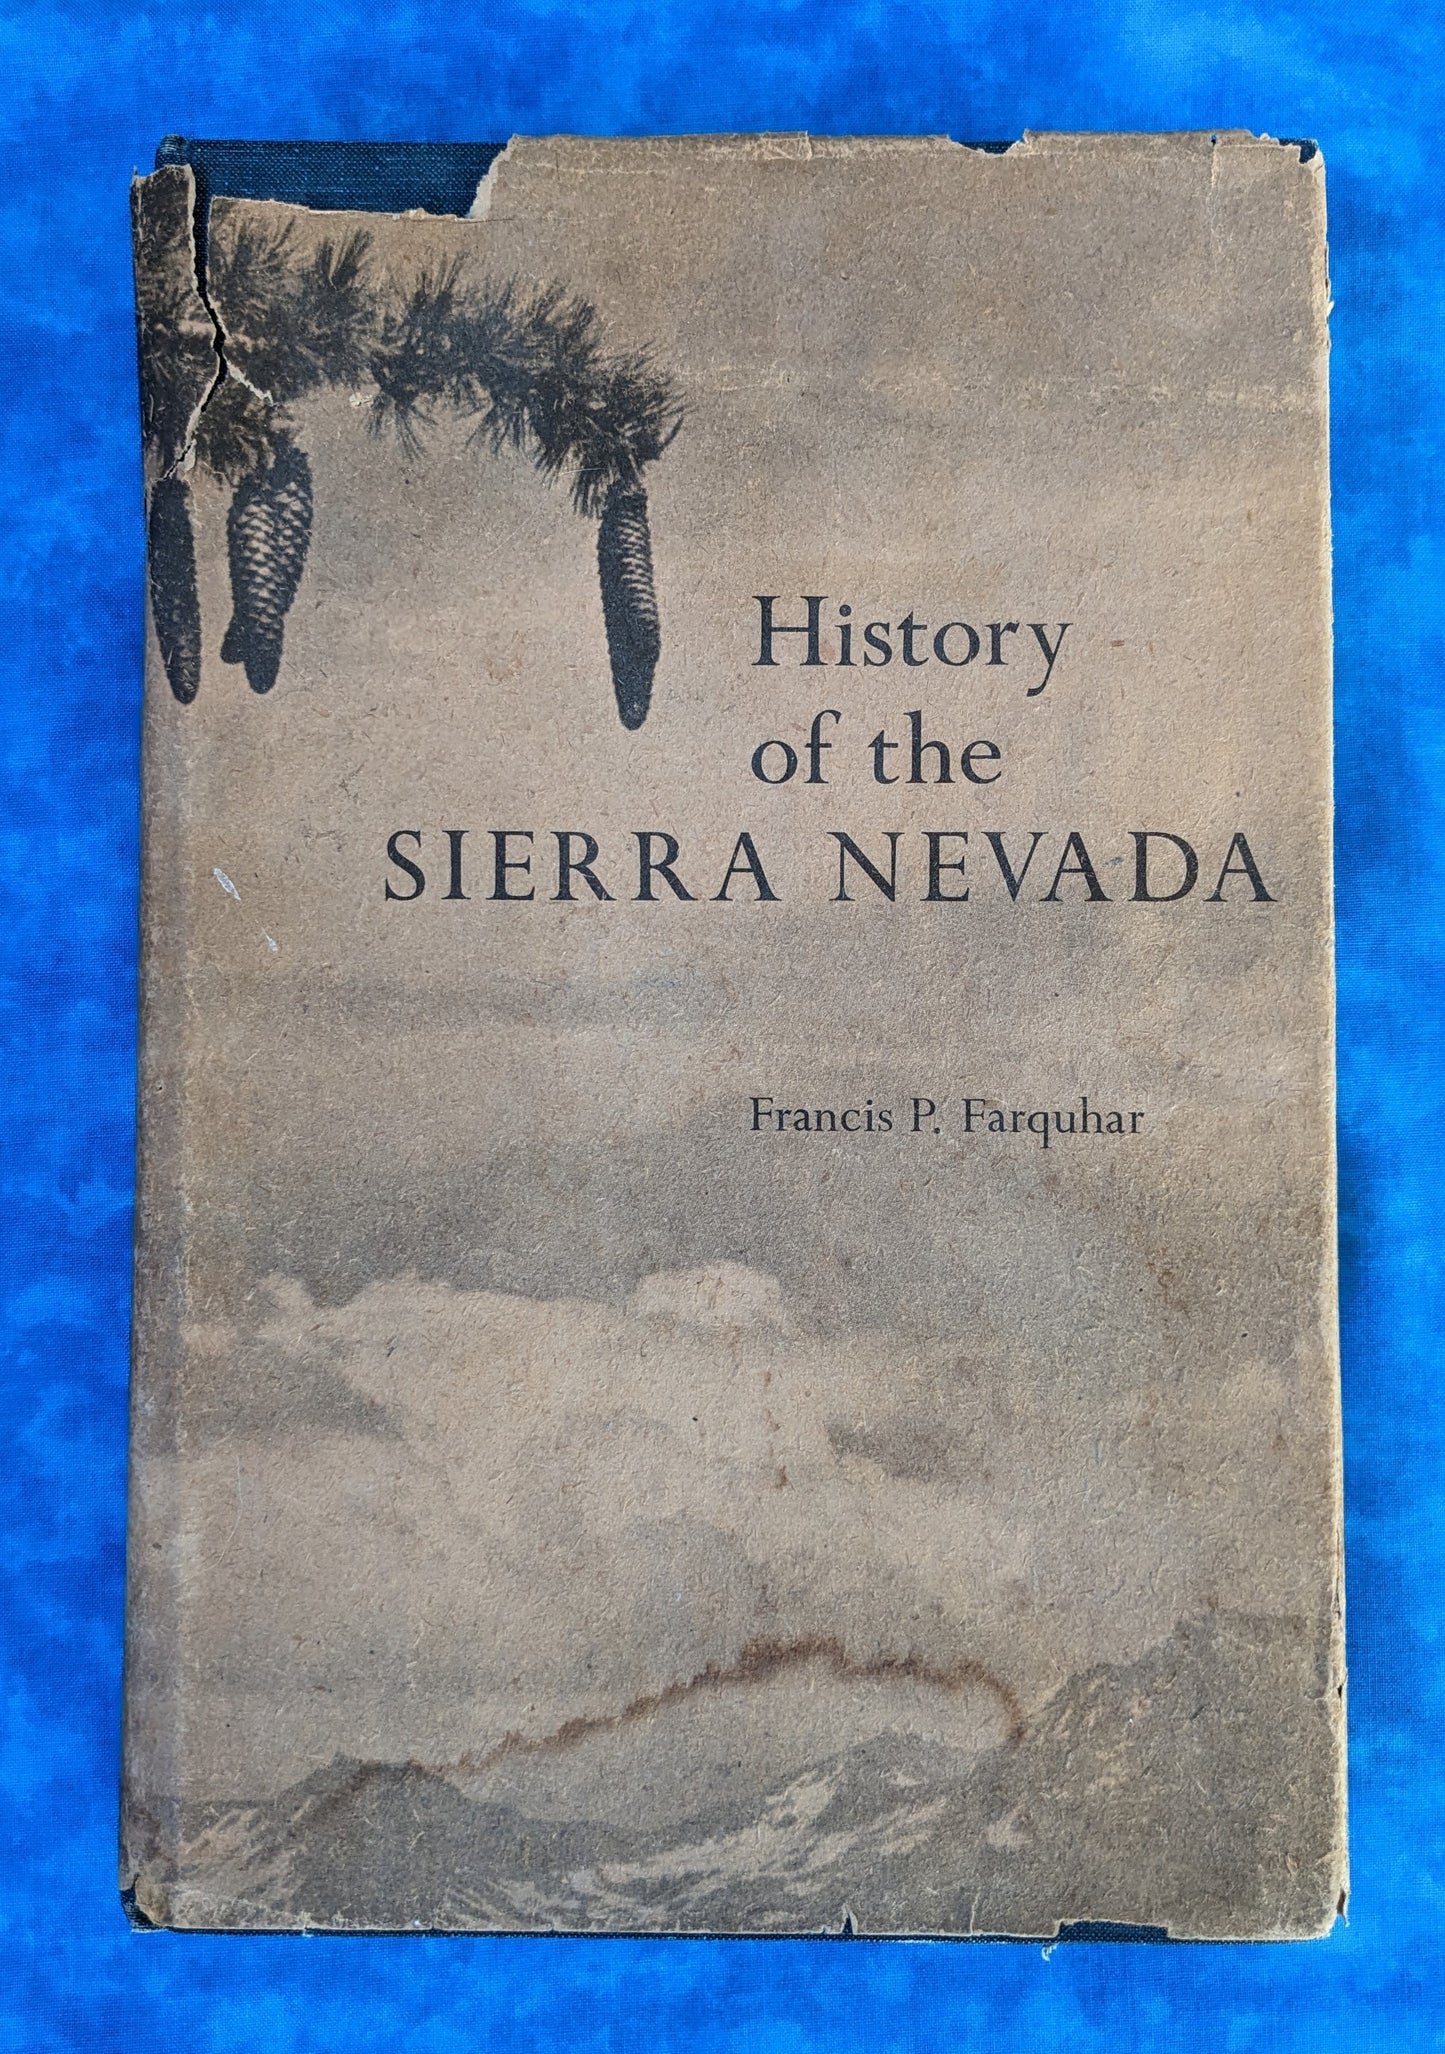 History of the Sierra Nevada vintage book front cover